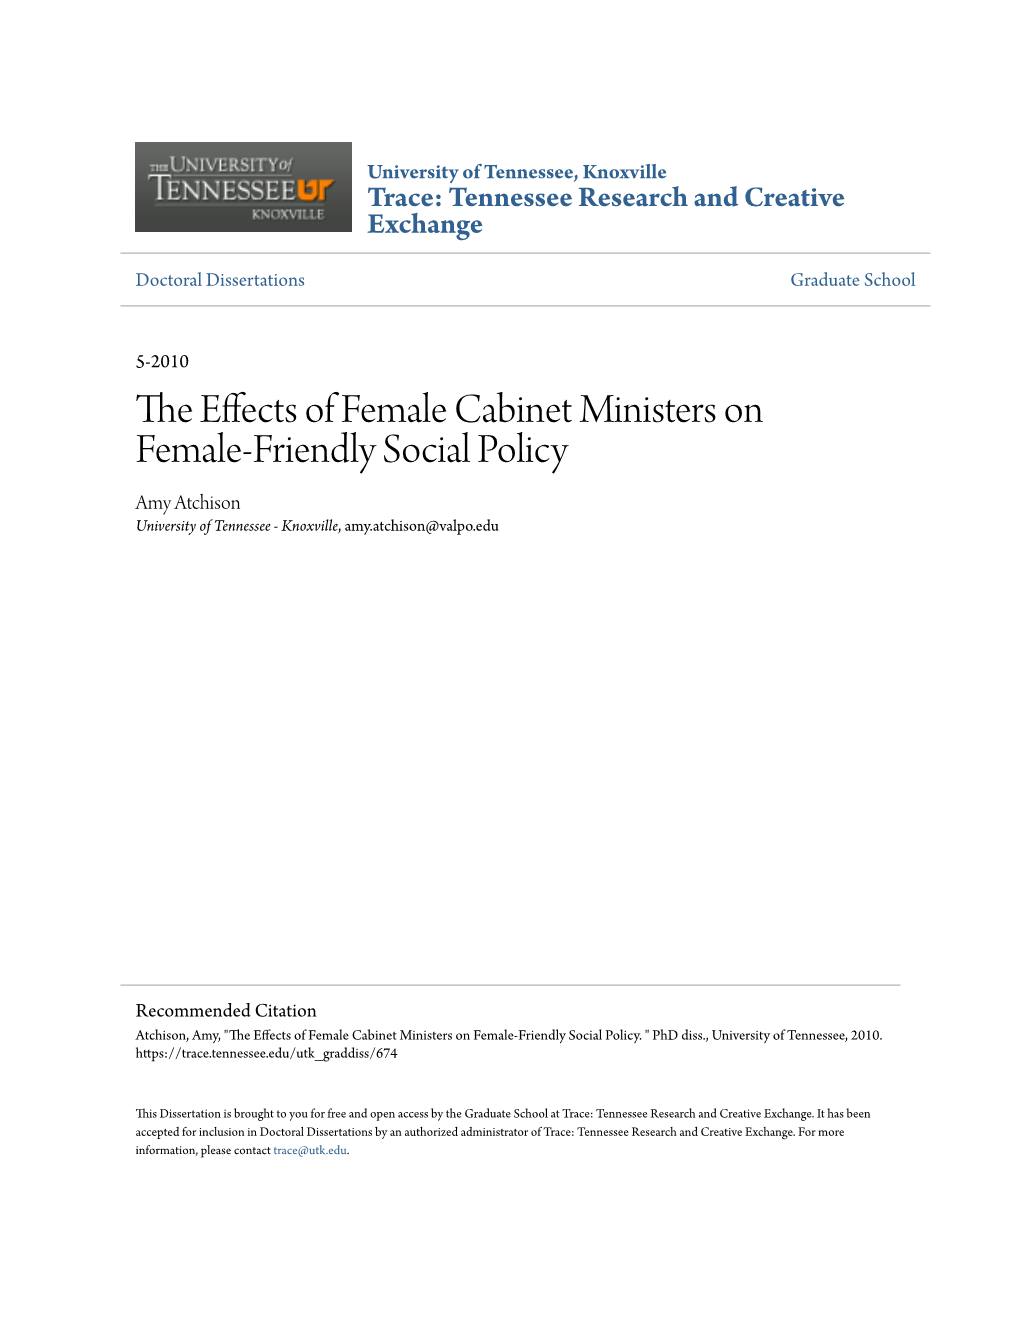 The Effects of Female Cabinet Ministers on Female-Friendly Social Policy